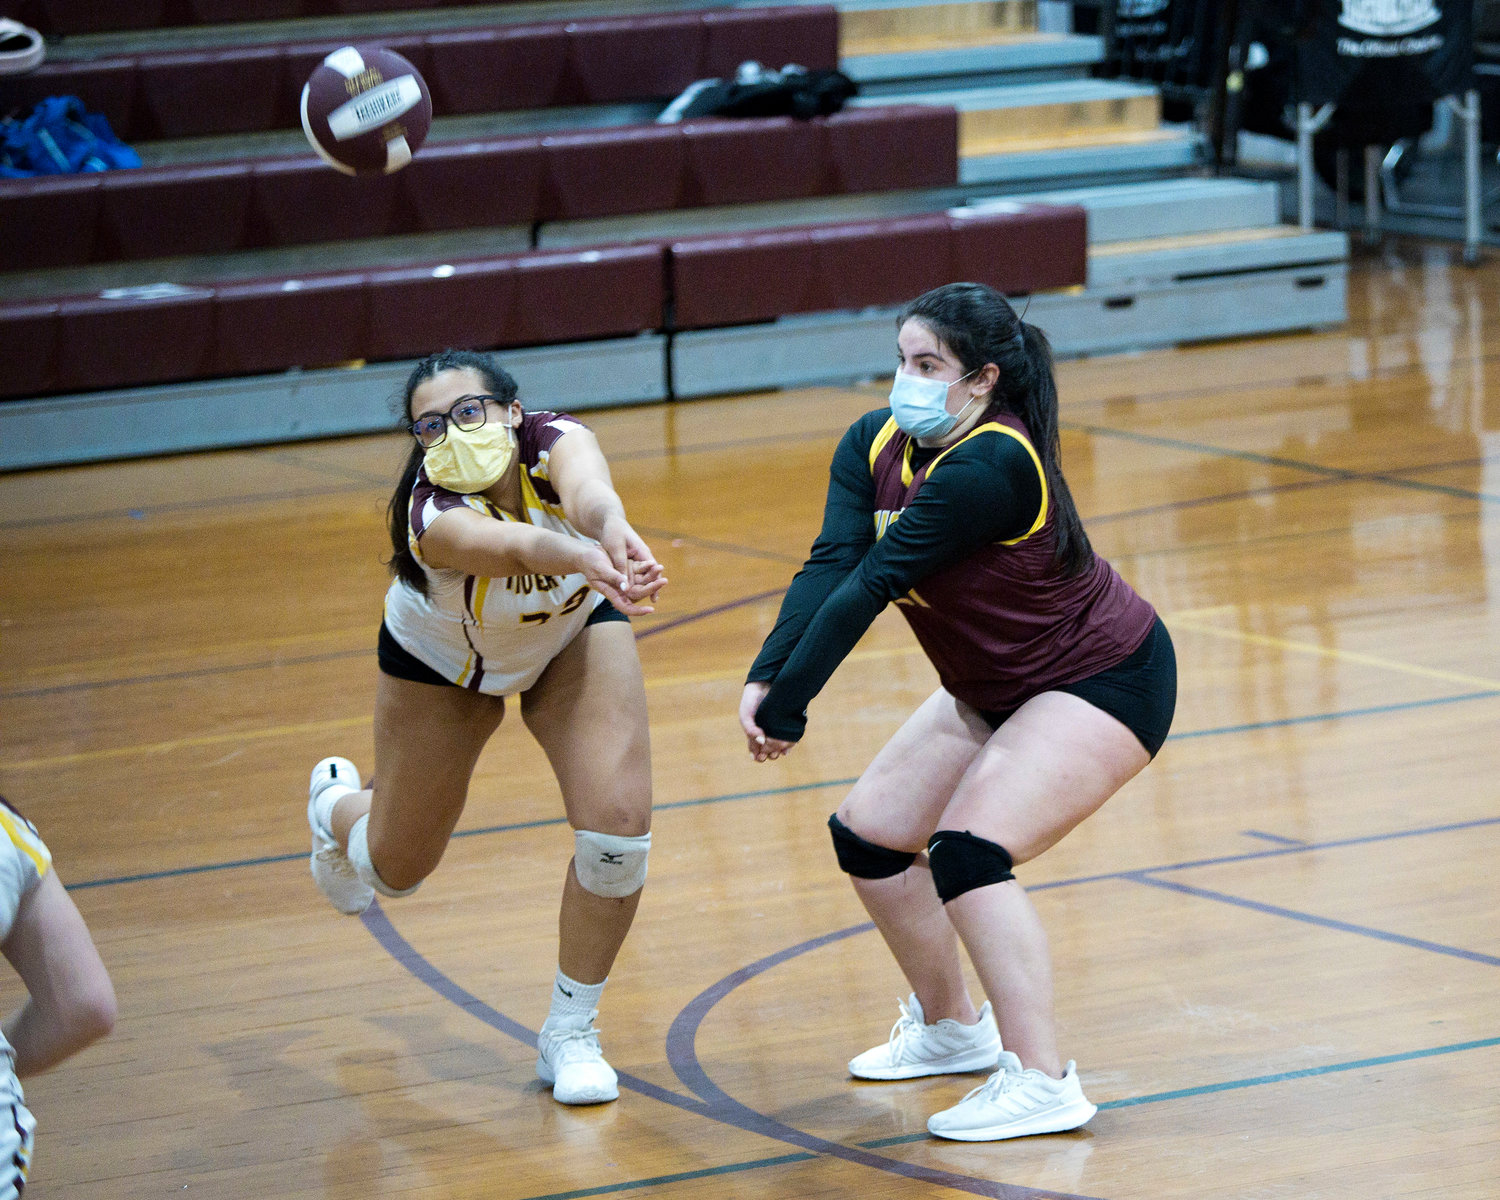 Olivia Miranda (left) and Olivia DeMacedo go for the ball during Friday night's game against Times Two Academy.